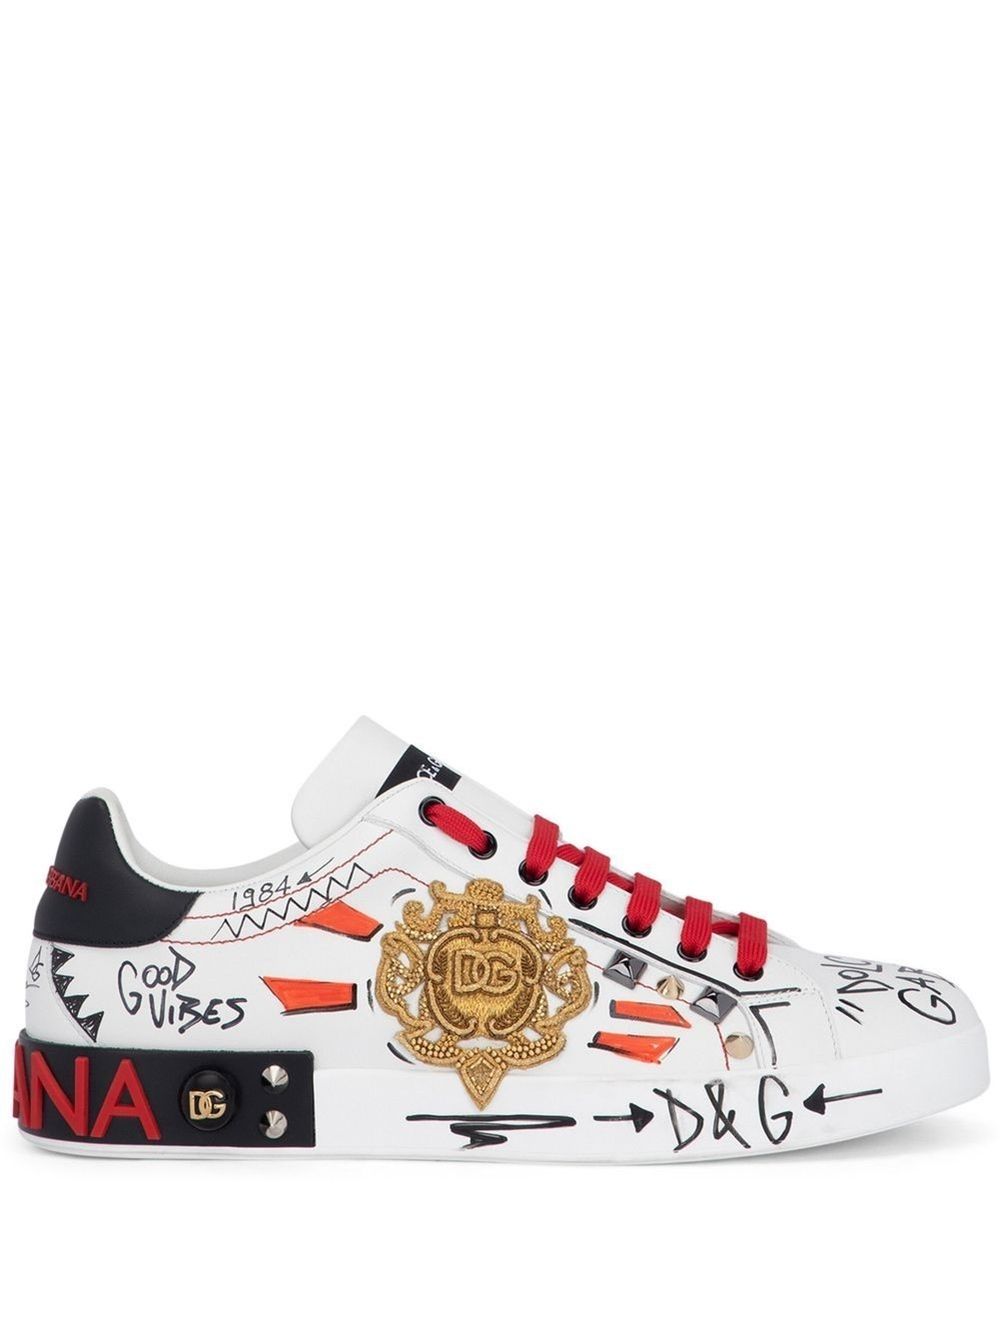 lace-up low-top sneakers | Dolce & Gabbana 